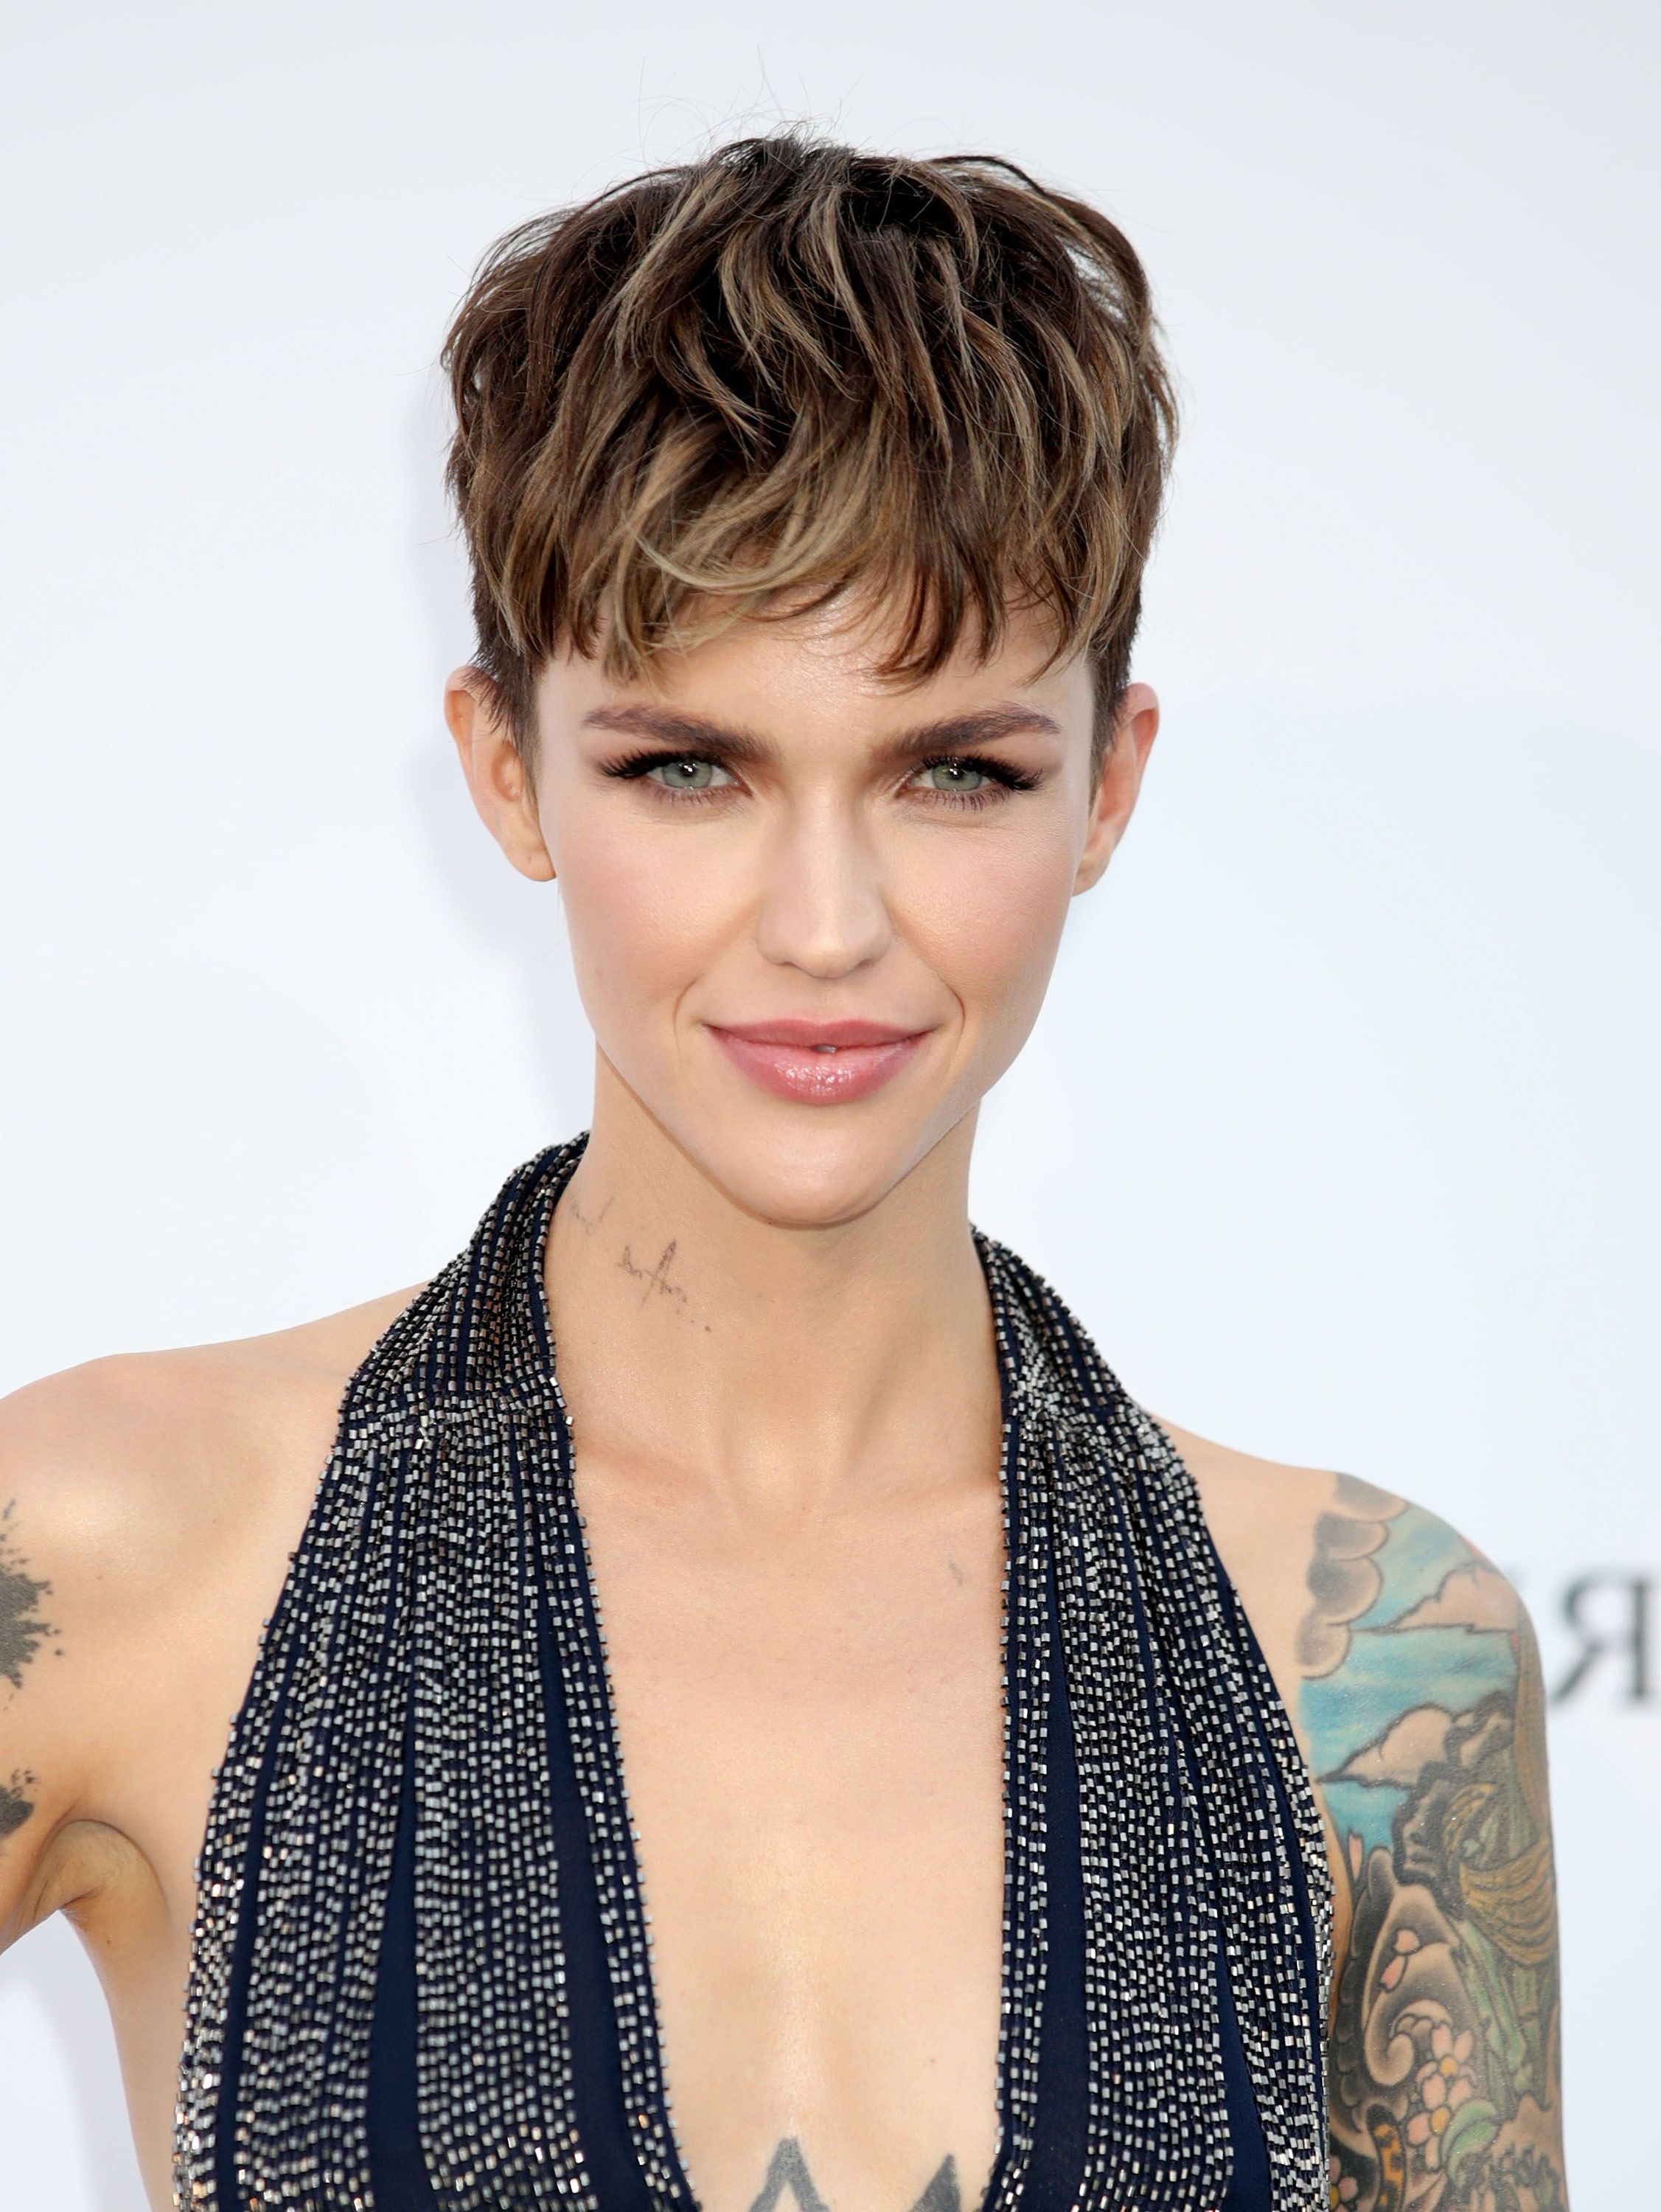 70 Best Pixie Cut Hairstyle Ideas 2019 – Cute Celebrity Pertaining To Highlighted Pixie Hairstyles (Gallery 20 of 20)